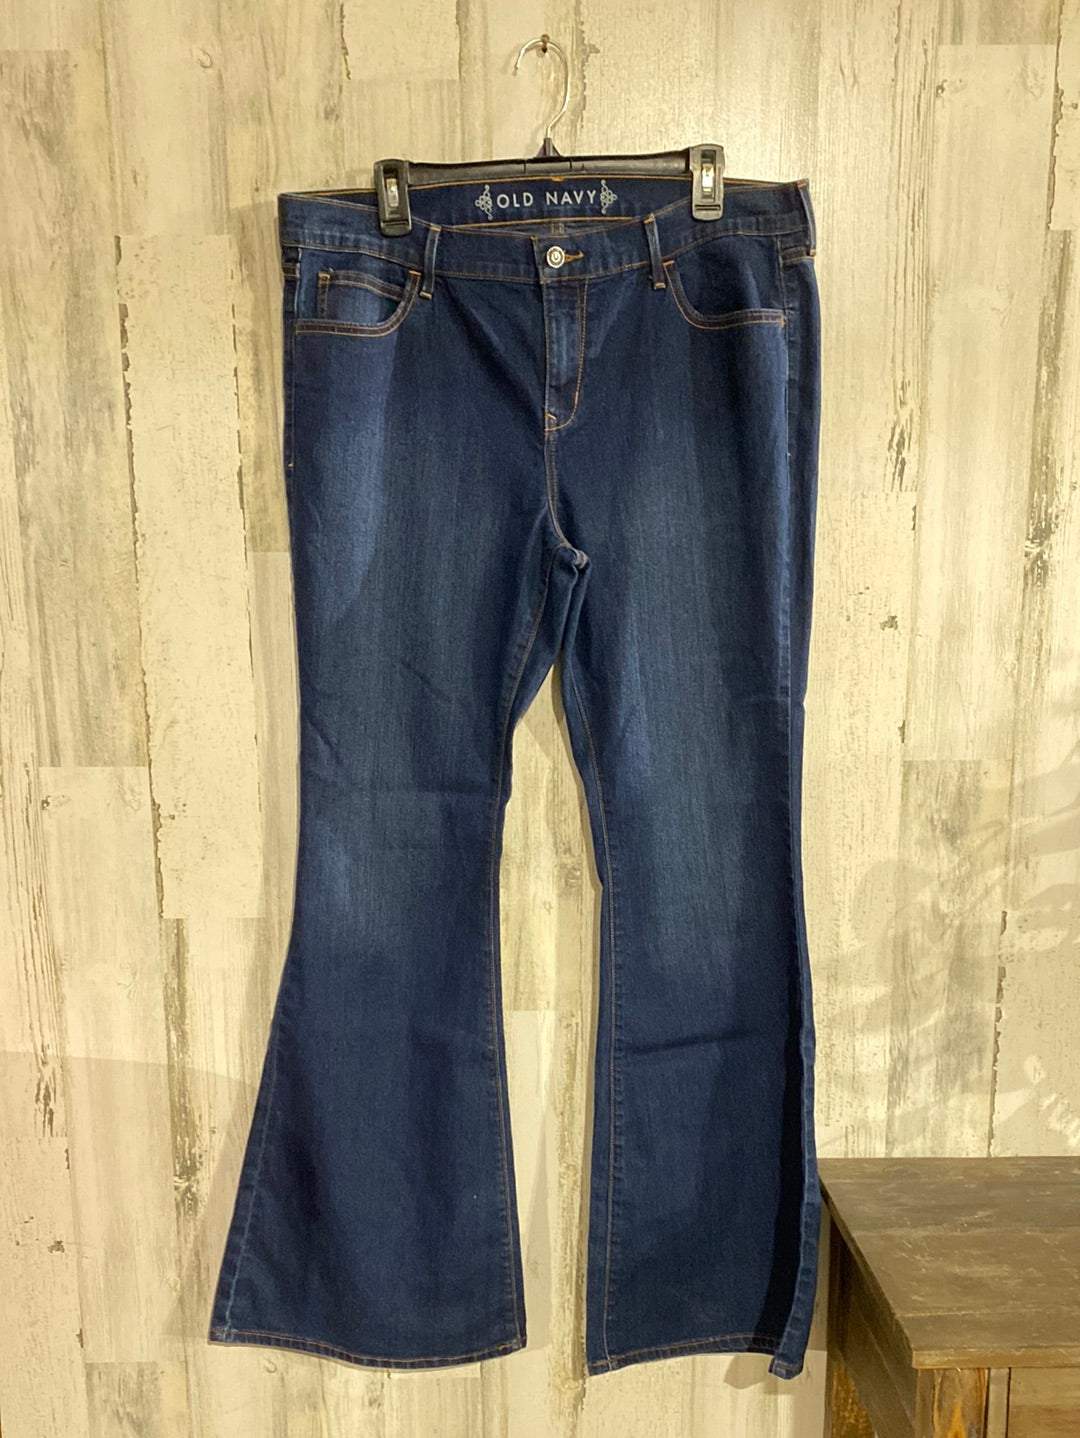 Womens Old Navy Flare Jeans 14